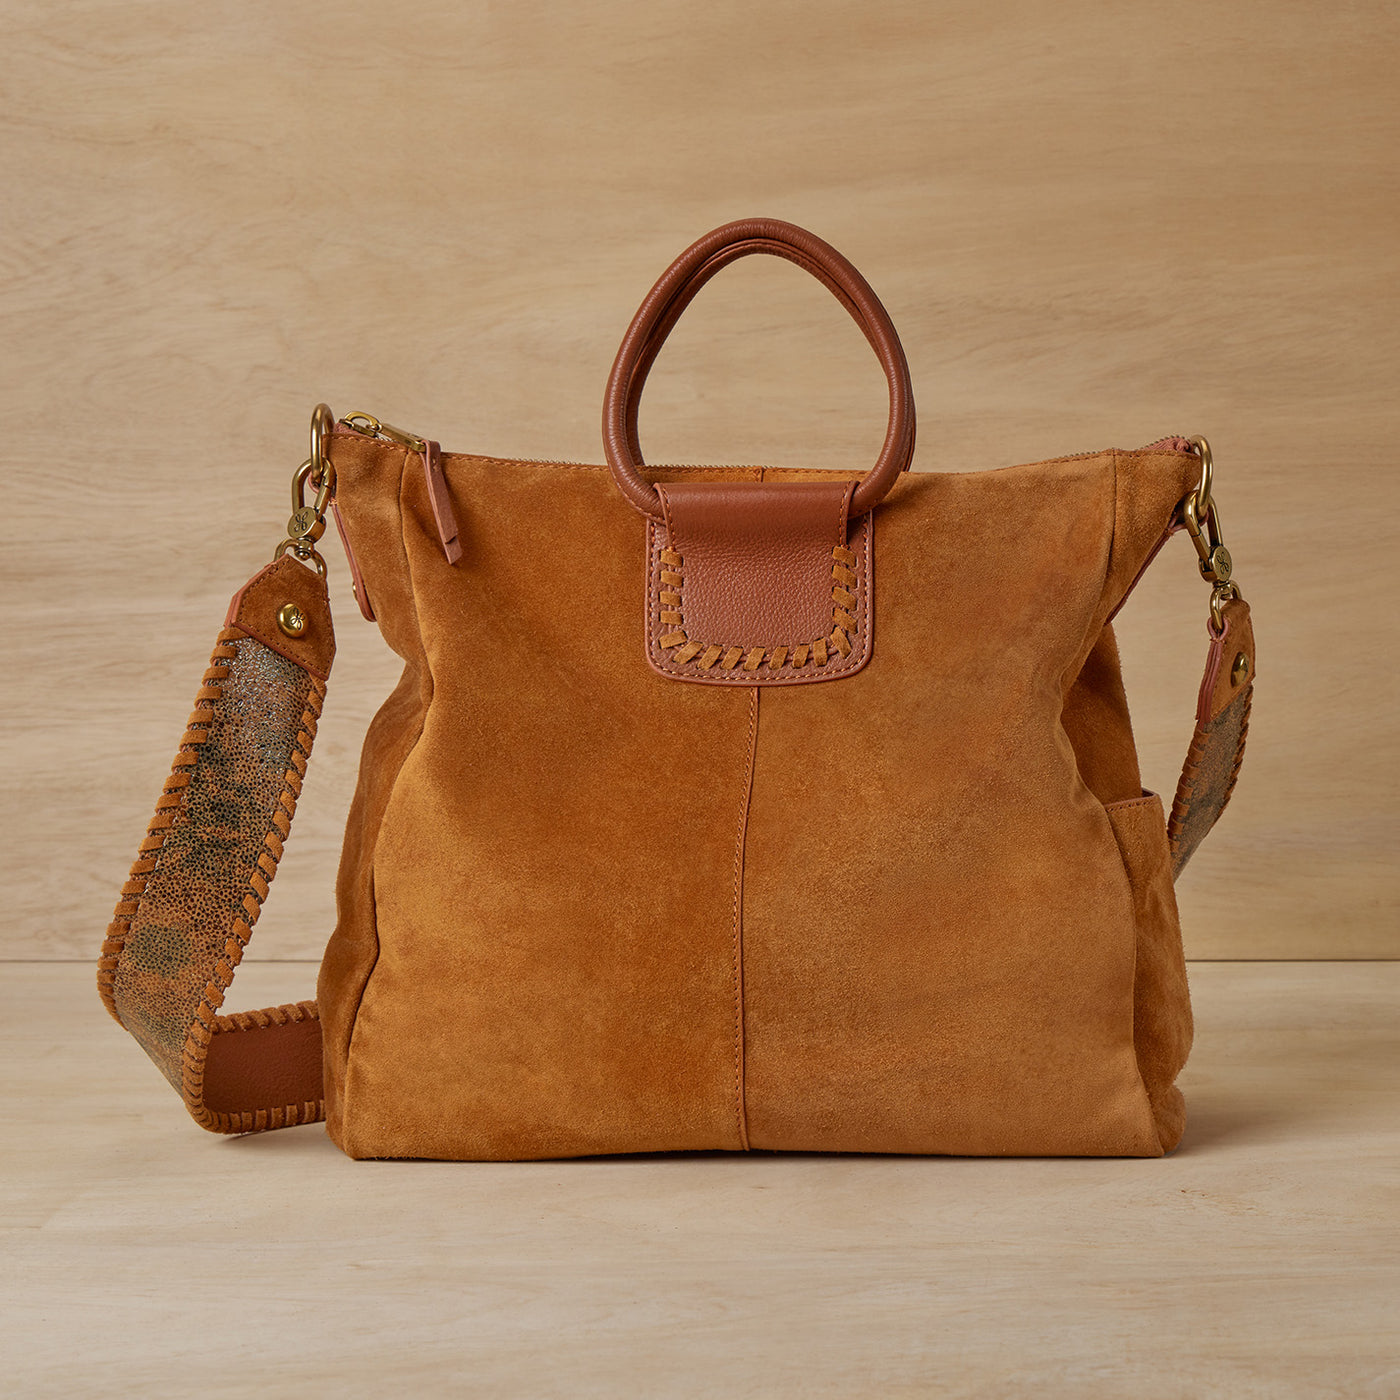 Sheila Large Satchel in Suede With Whipstitch - Cognac